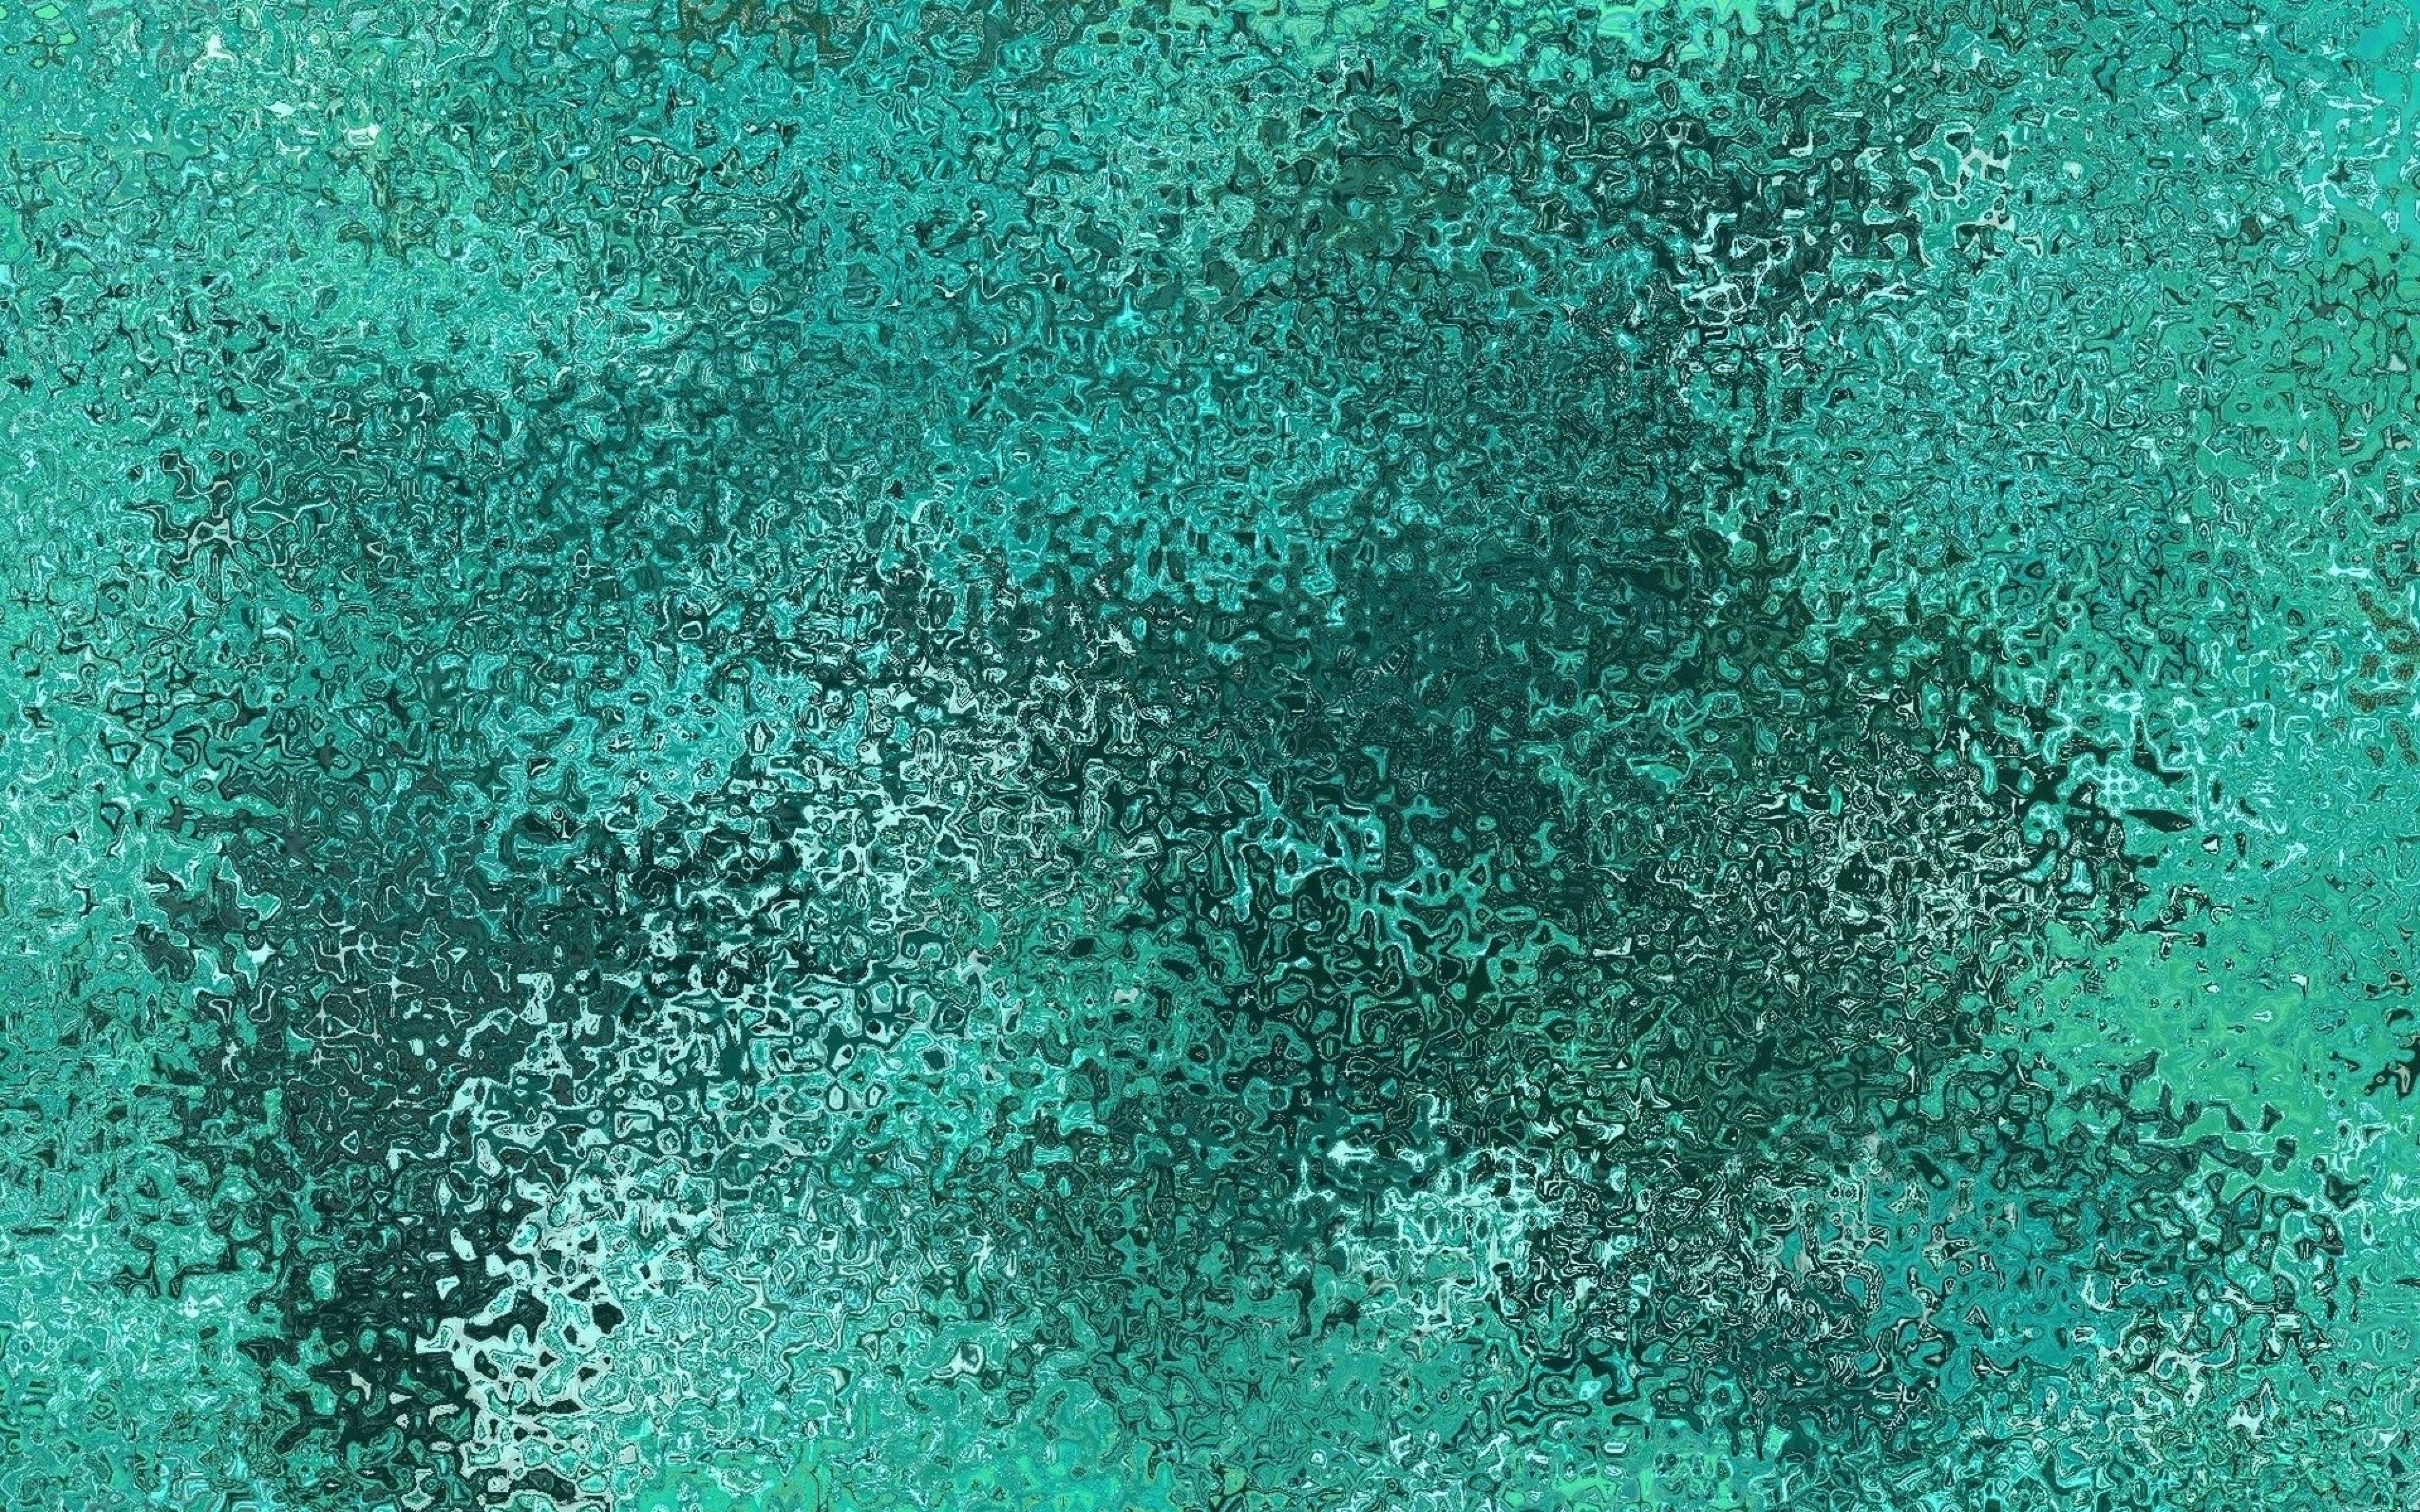 Teal Hd Image Backgrounds - Aesthetic Teal Green Backgrounds - HD Wallpaper 